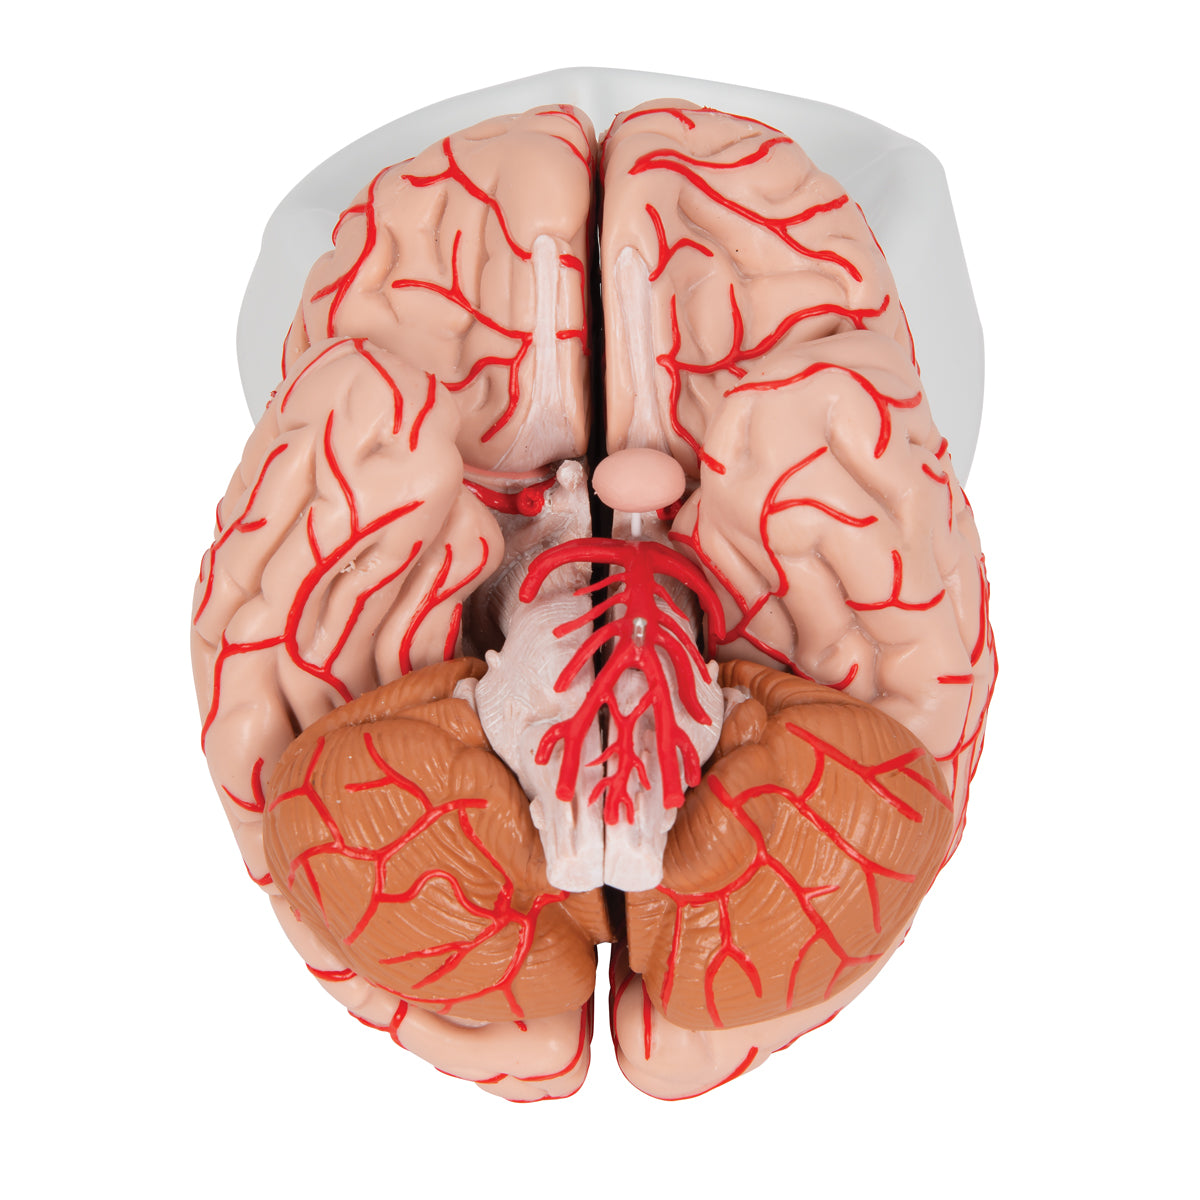 Brain model that also shows arteries. Can be separated into 9 parts